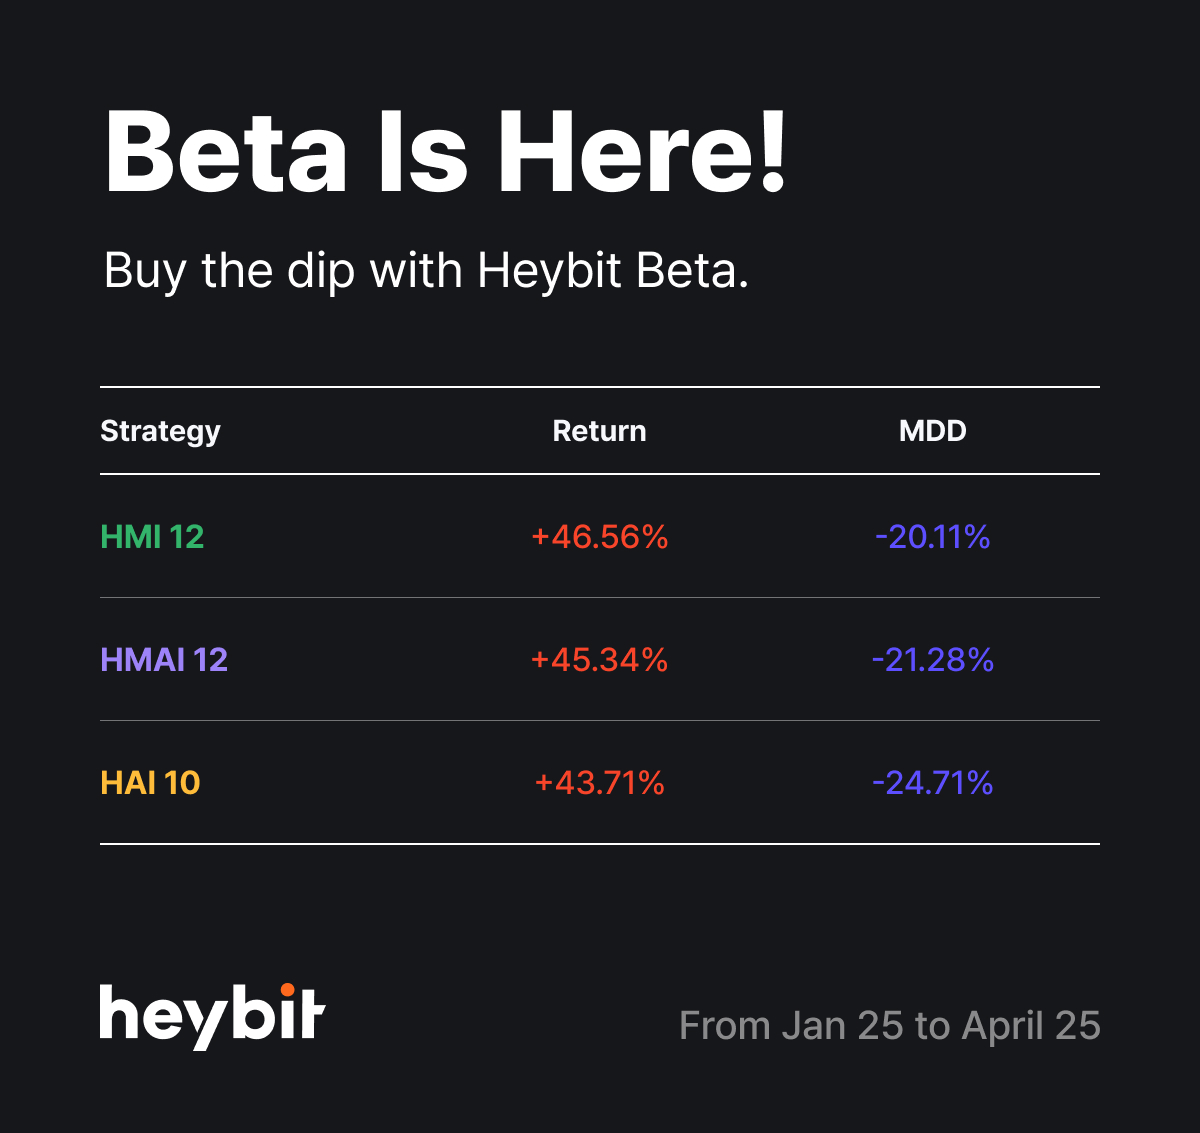 🚀Make sure what’s going around in the market now and carefully think about the right timing for “buy-the-dip” using the Heybit Beta strategy as we wait for the possible upcoming bull market rally 🔍 Crypto News $BTC ☀️ Grayscale Research head predicts BTC may reach up to $200k